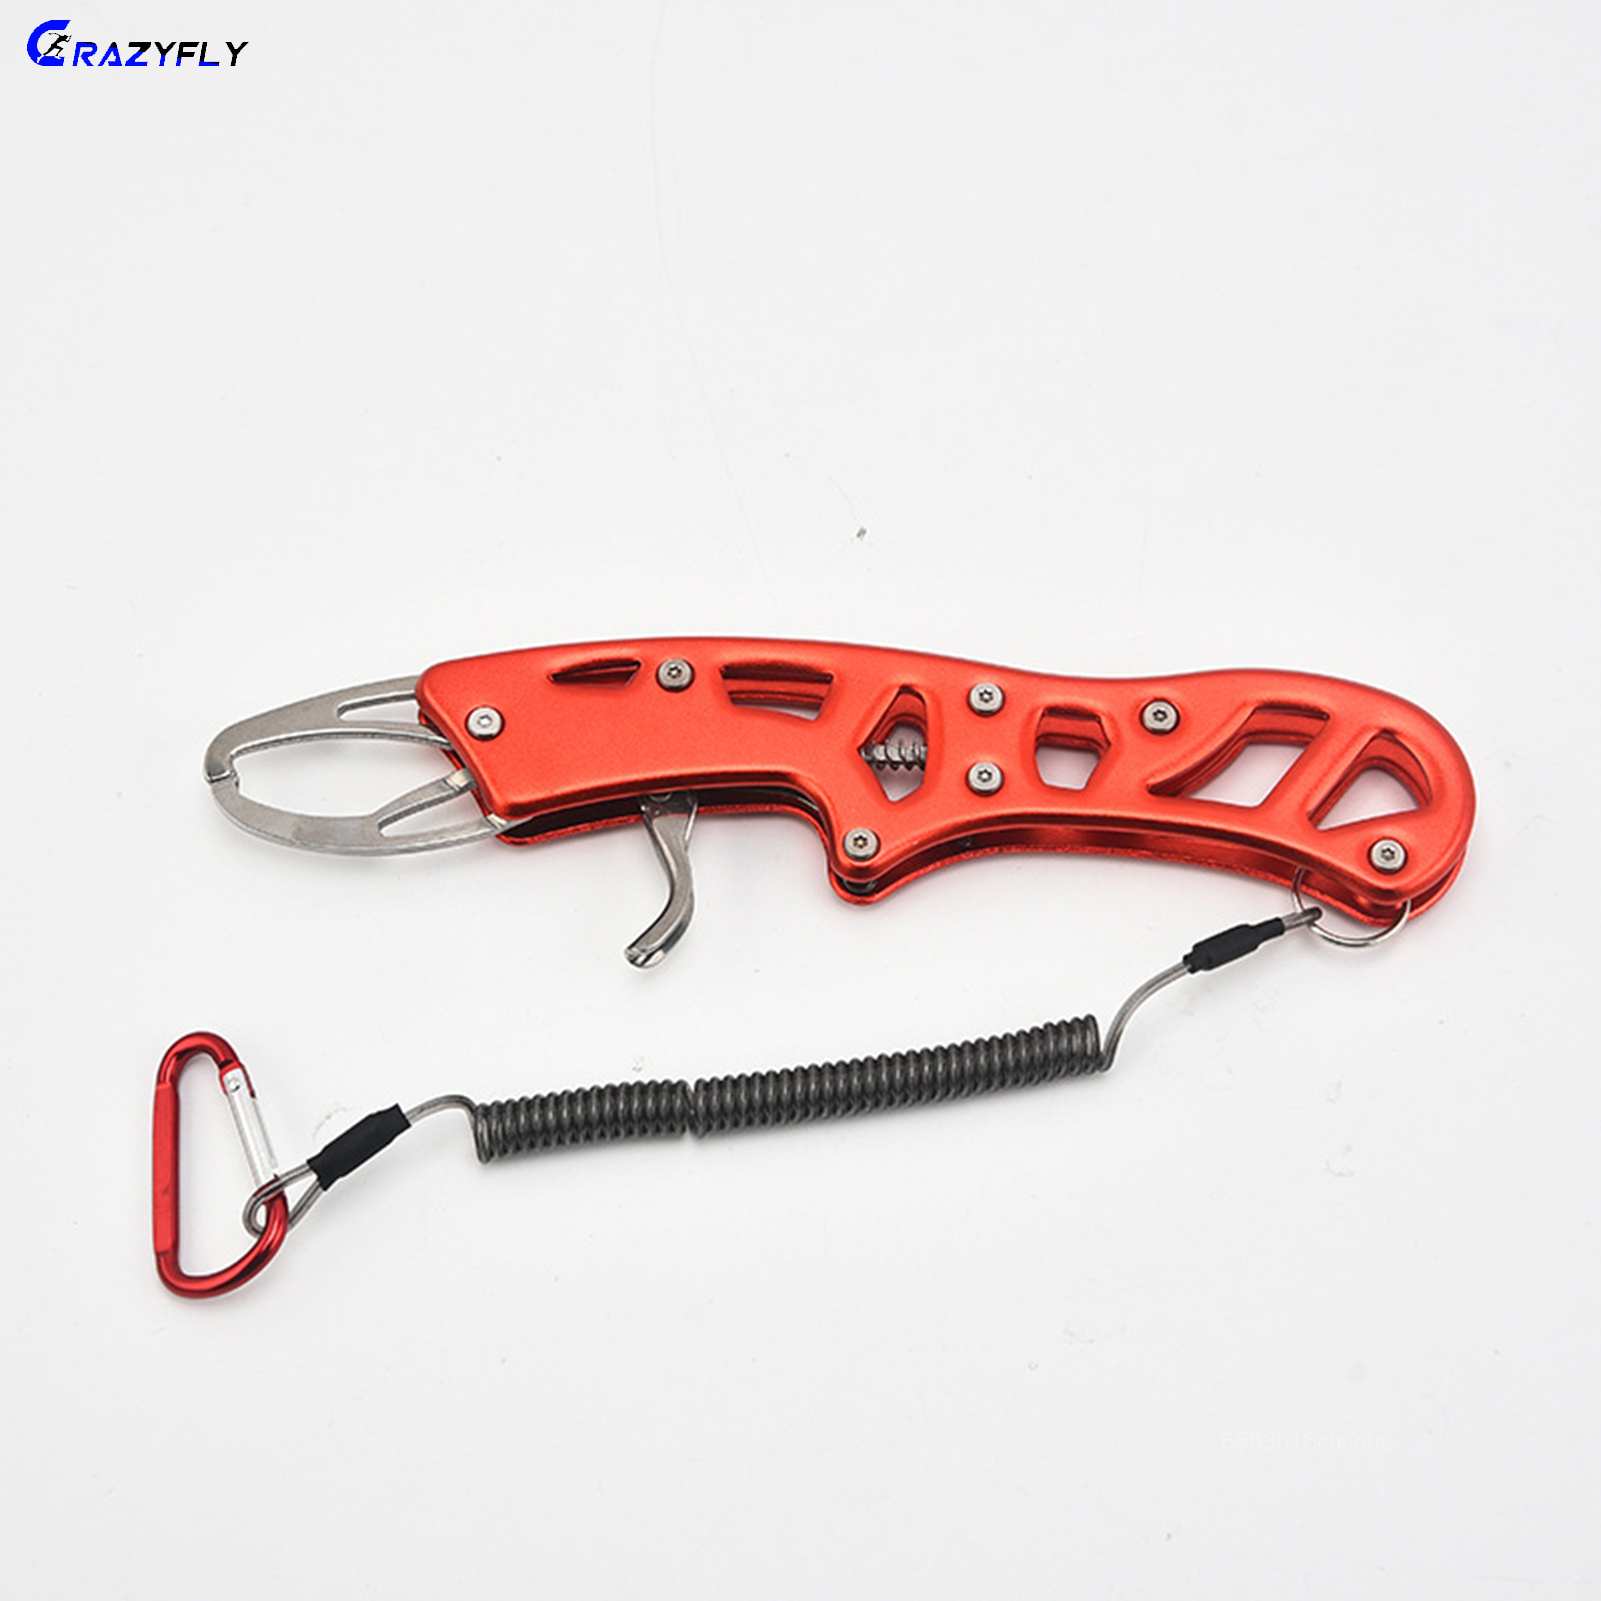 Crazyfly Metal Fishing Lip Grippers Stainless Steel Portable